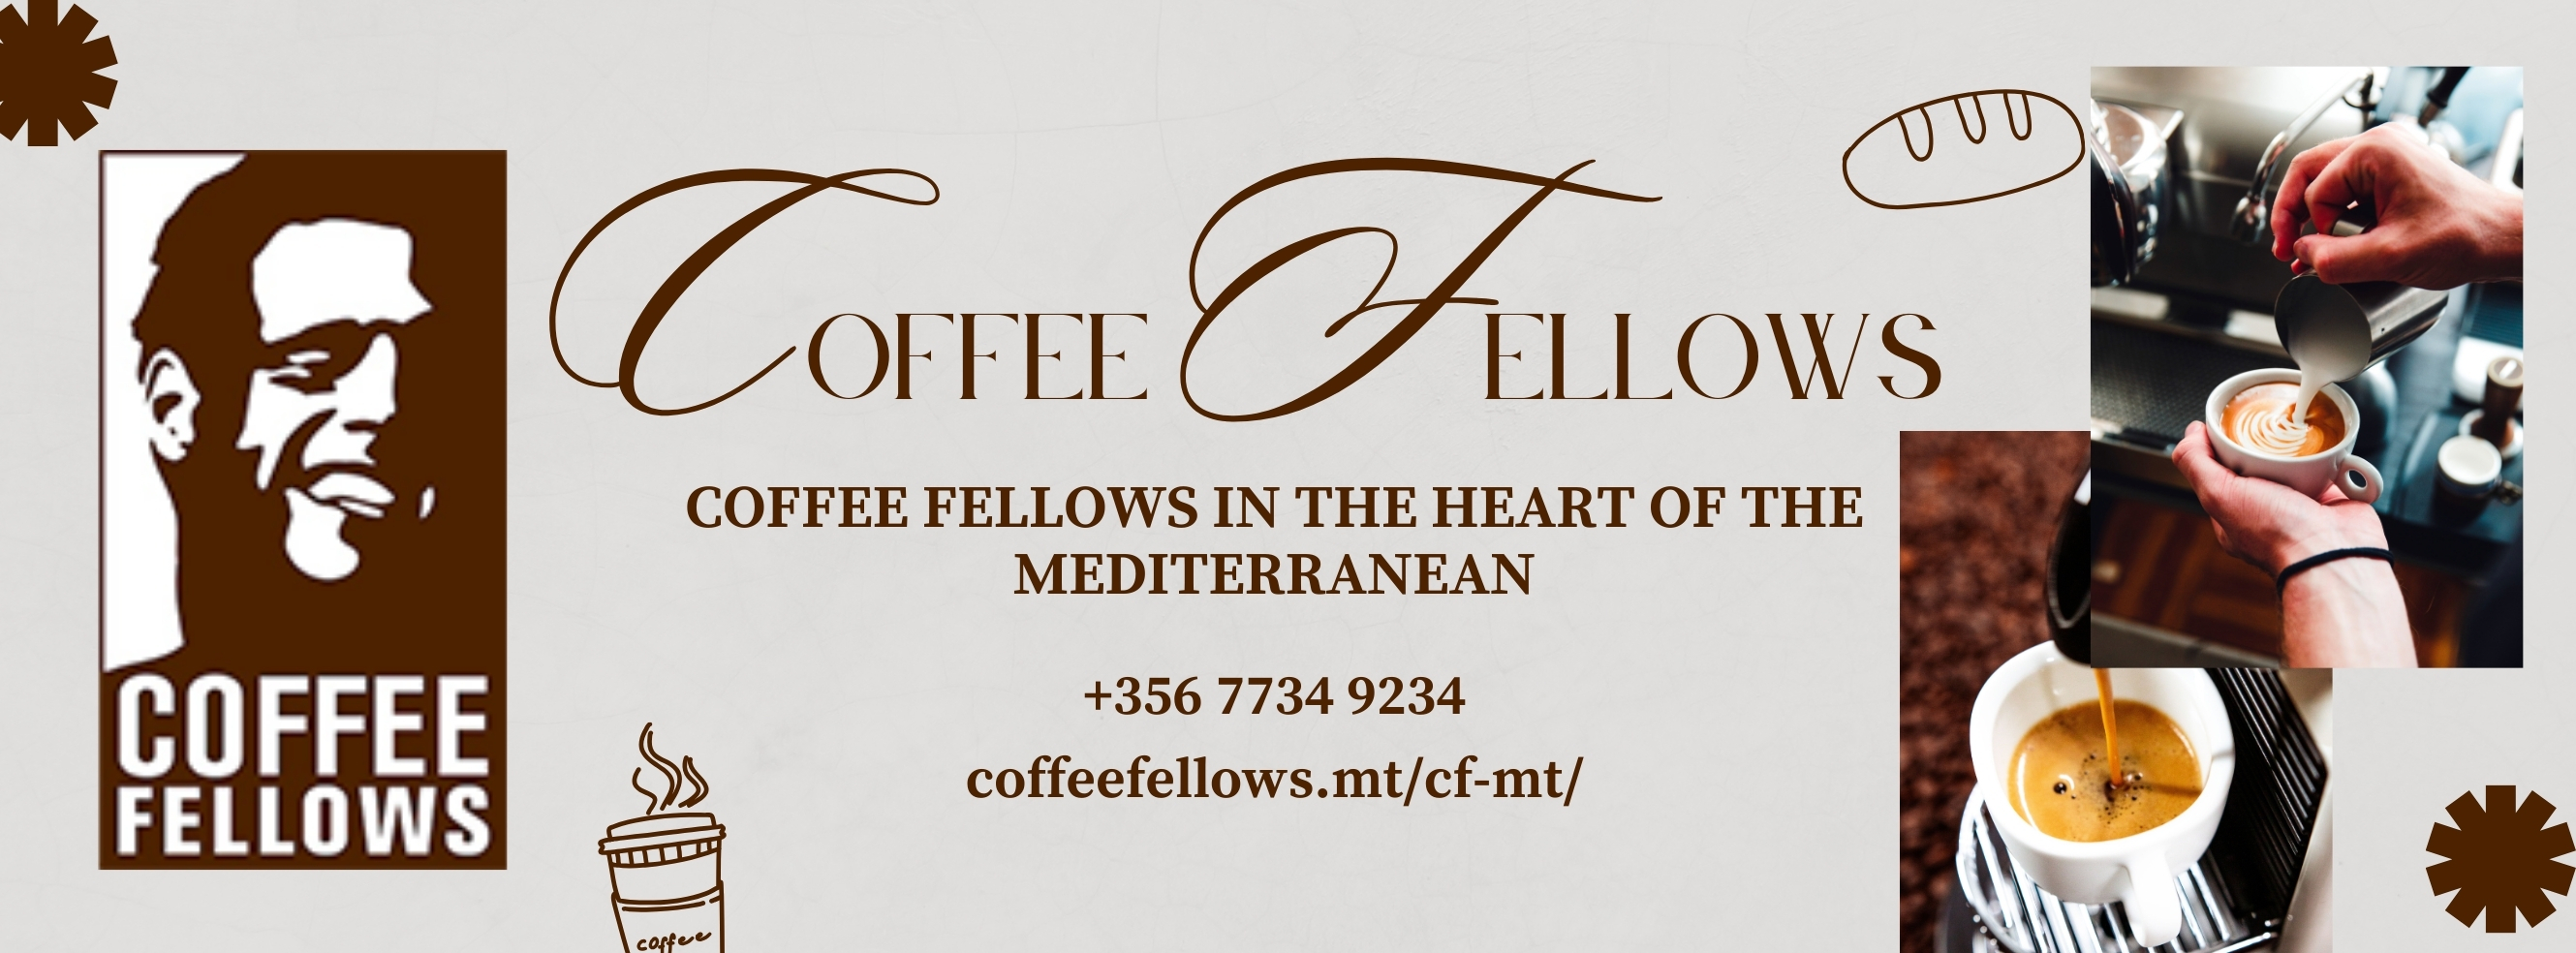 Coffee Fellows Cover Image